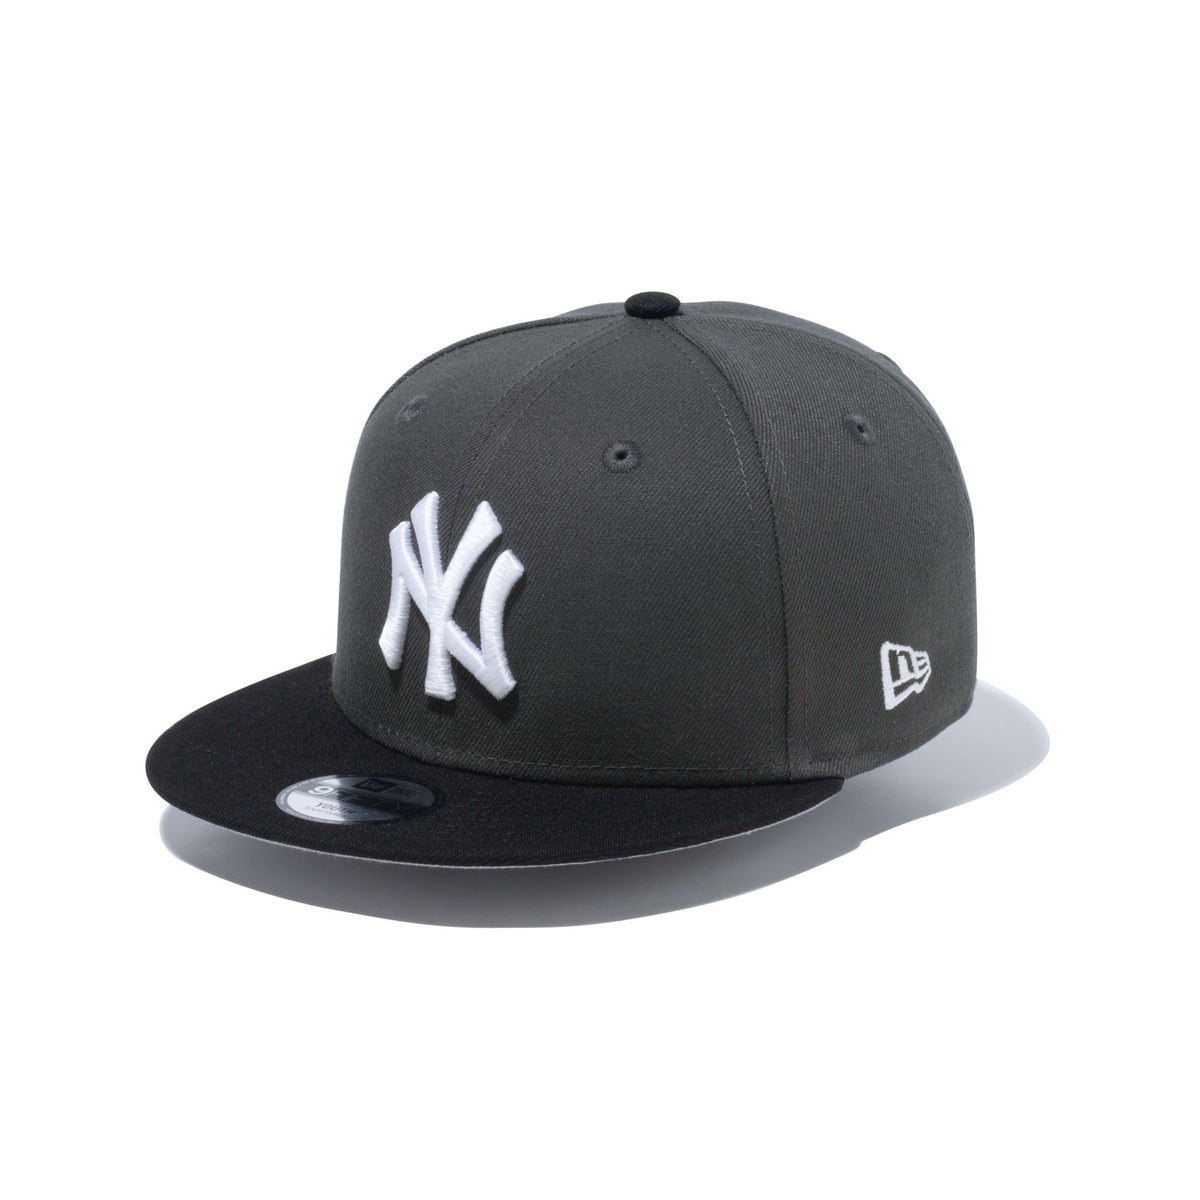 Youth 9FIFTY SHADOW ニューヨーク・ヤンキース ダーク 